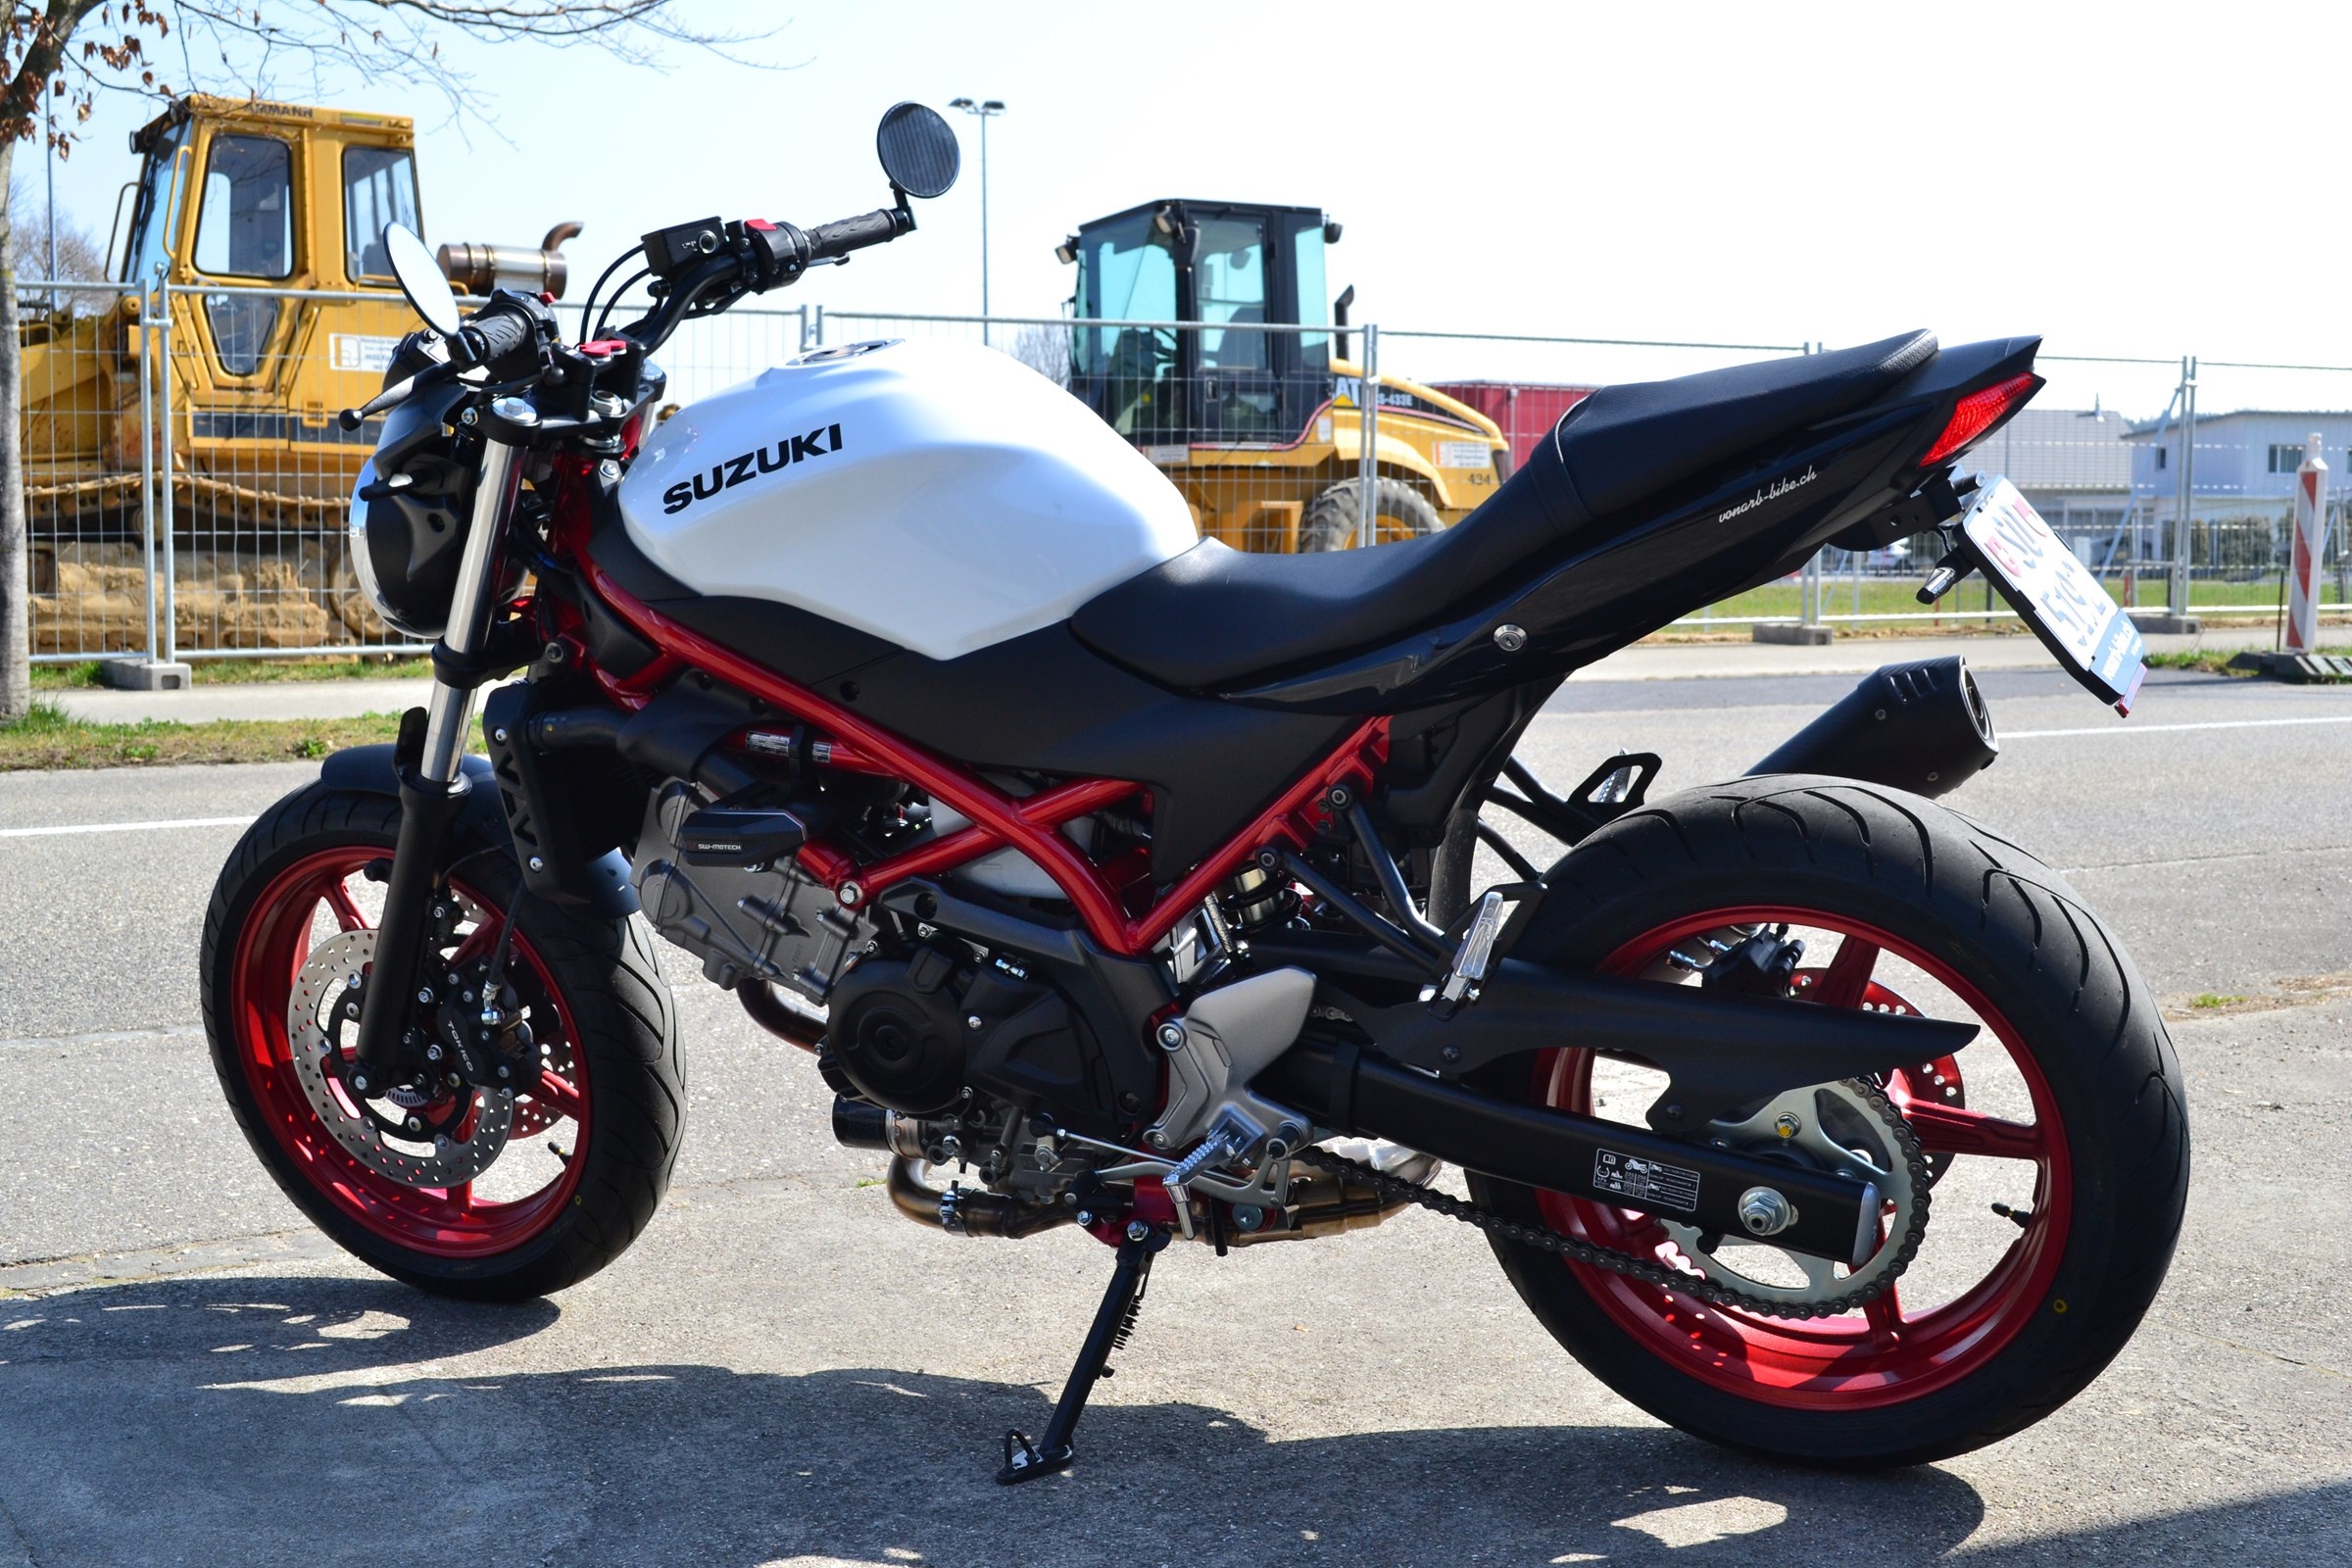 Suzuki SV650, New vehicle purchase, Affordable price, Low fuel consumption, 2400x1600 HD Desktop